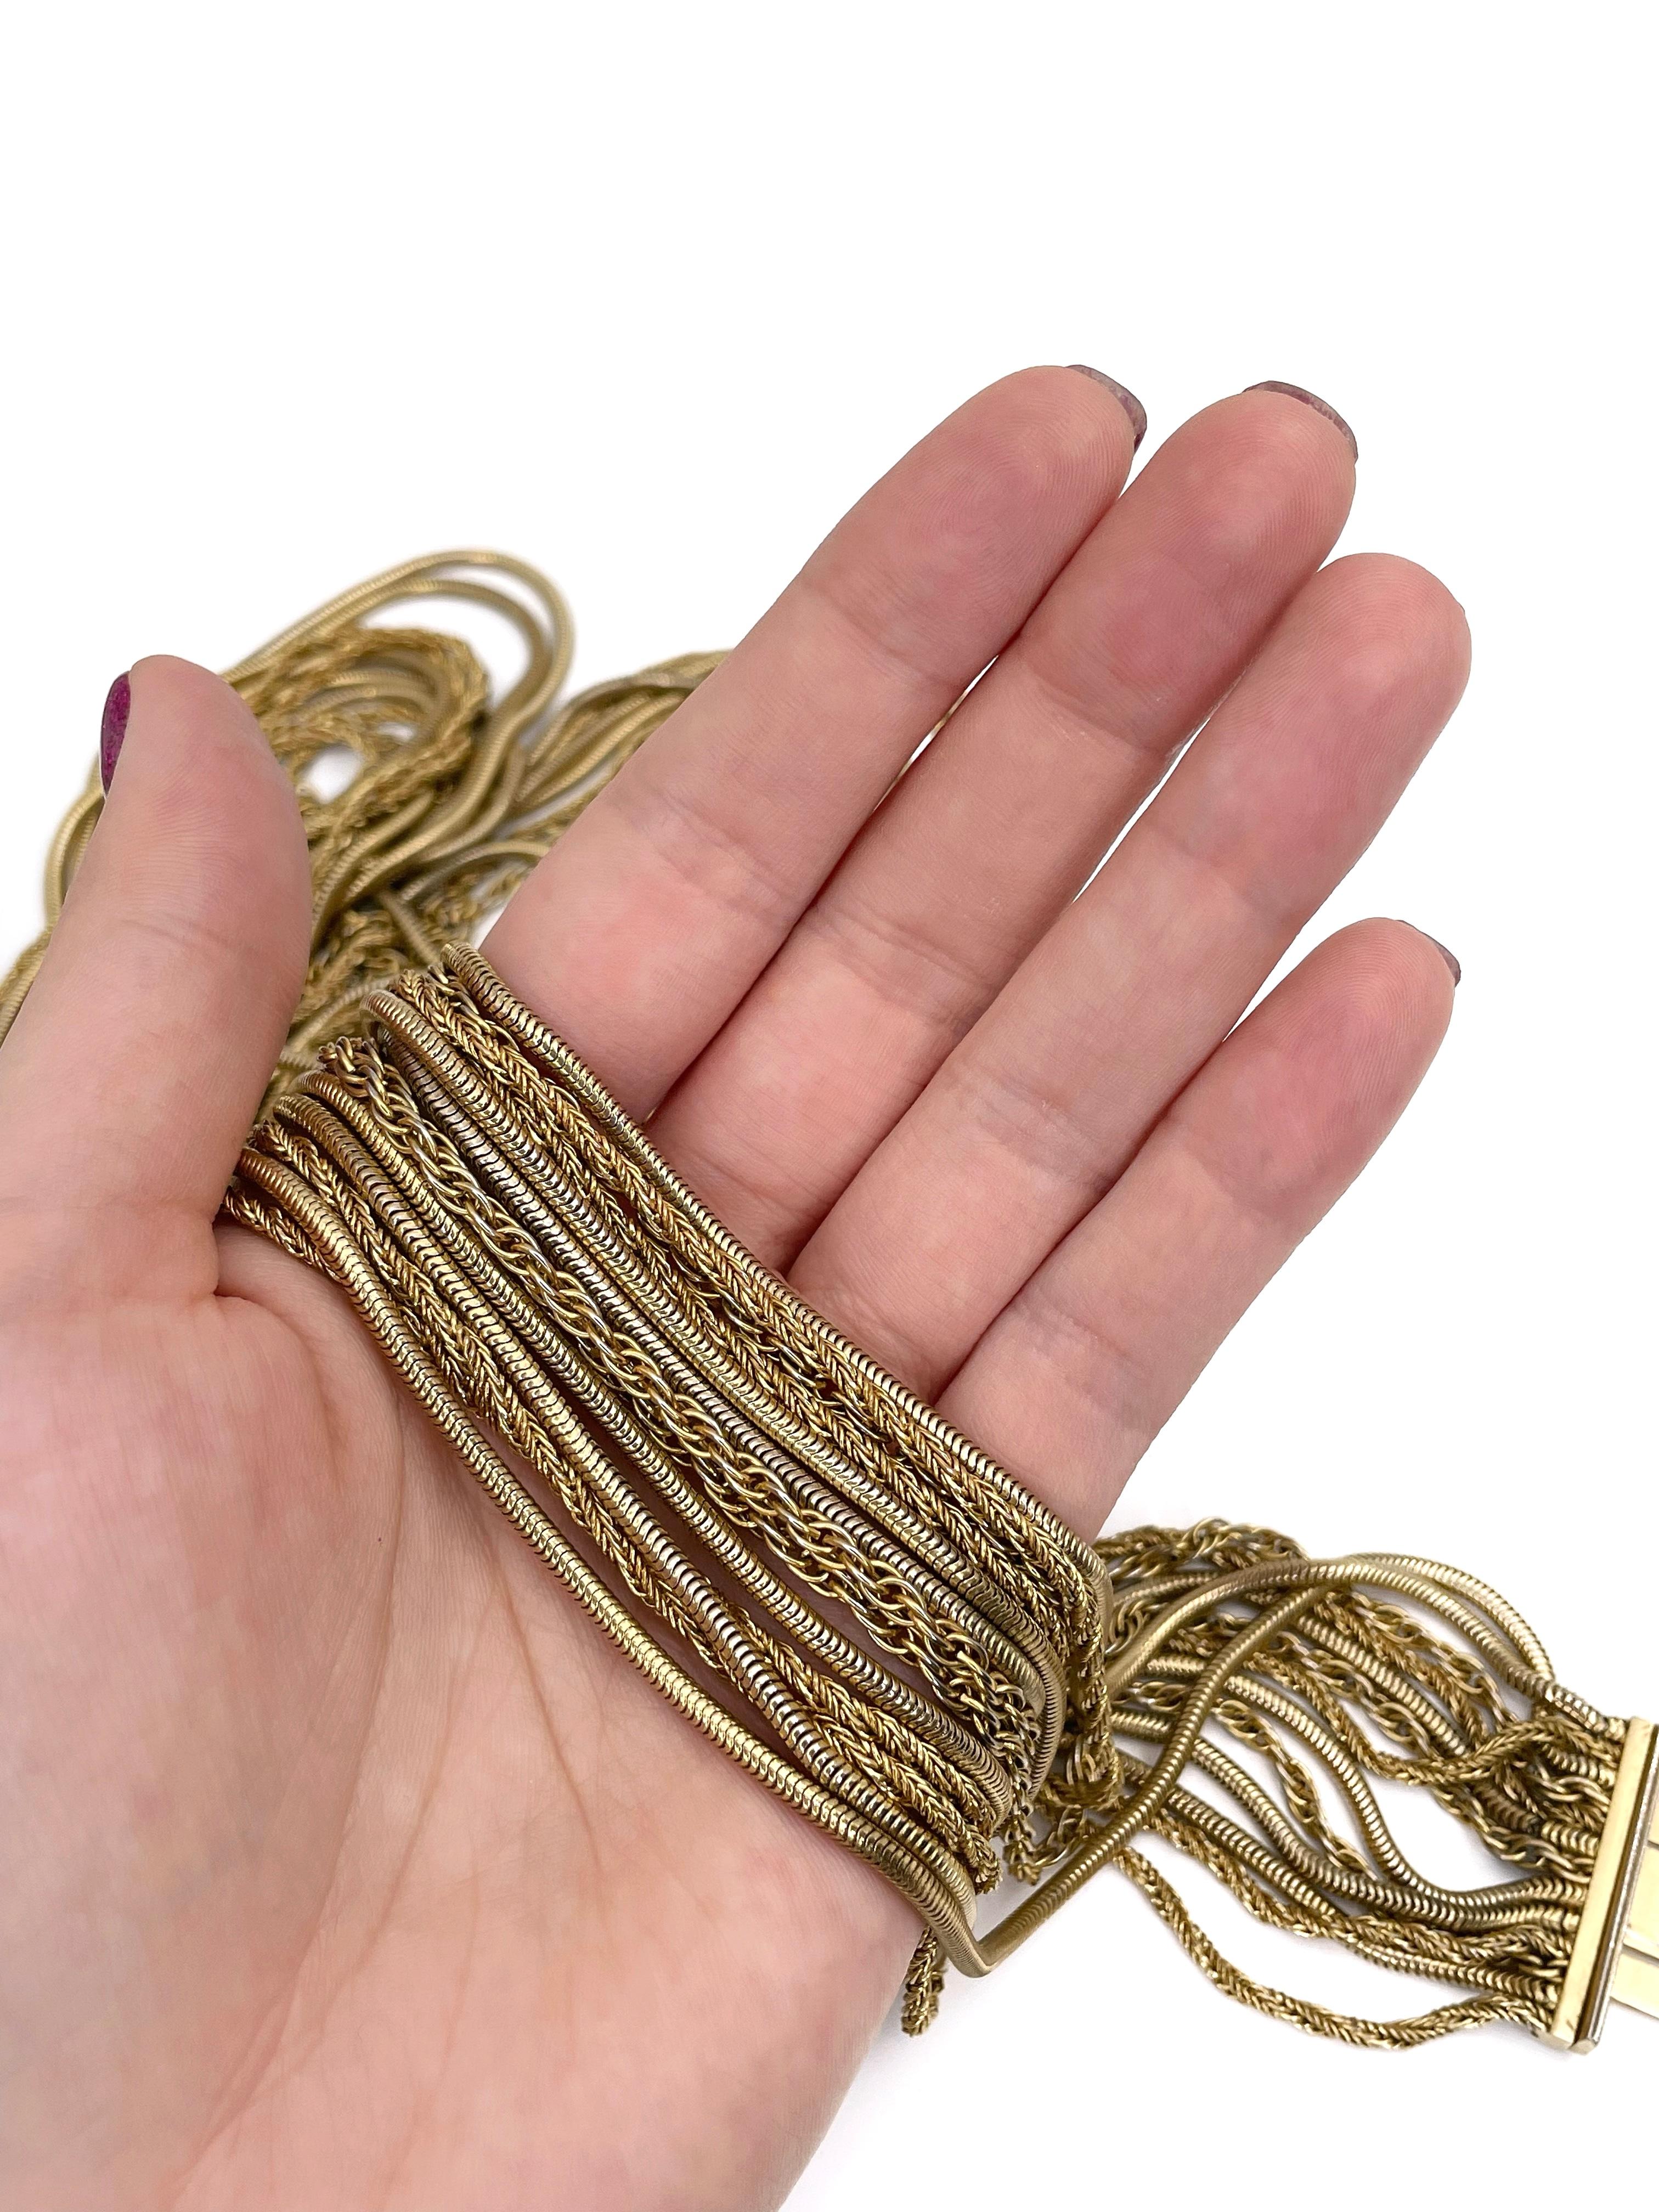 This is a stunning graduated multi chain necklace designed by Grosse in 1970. This piece is gold plated. It features 13 strands of different length and weave. 

Markings: “Grosse© 1970 Germany” (shown in photos).

Longest chain: 110cm
Shortest